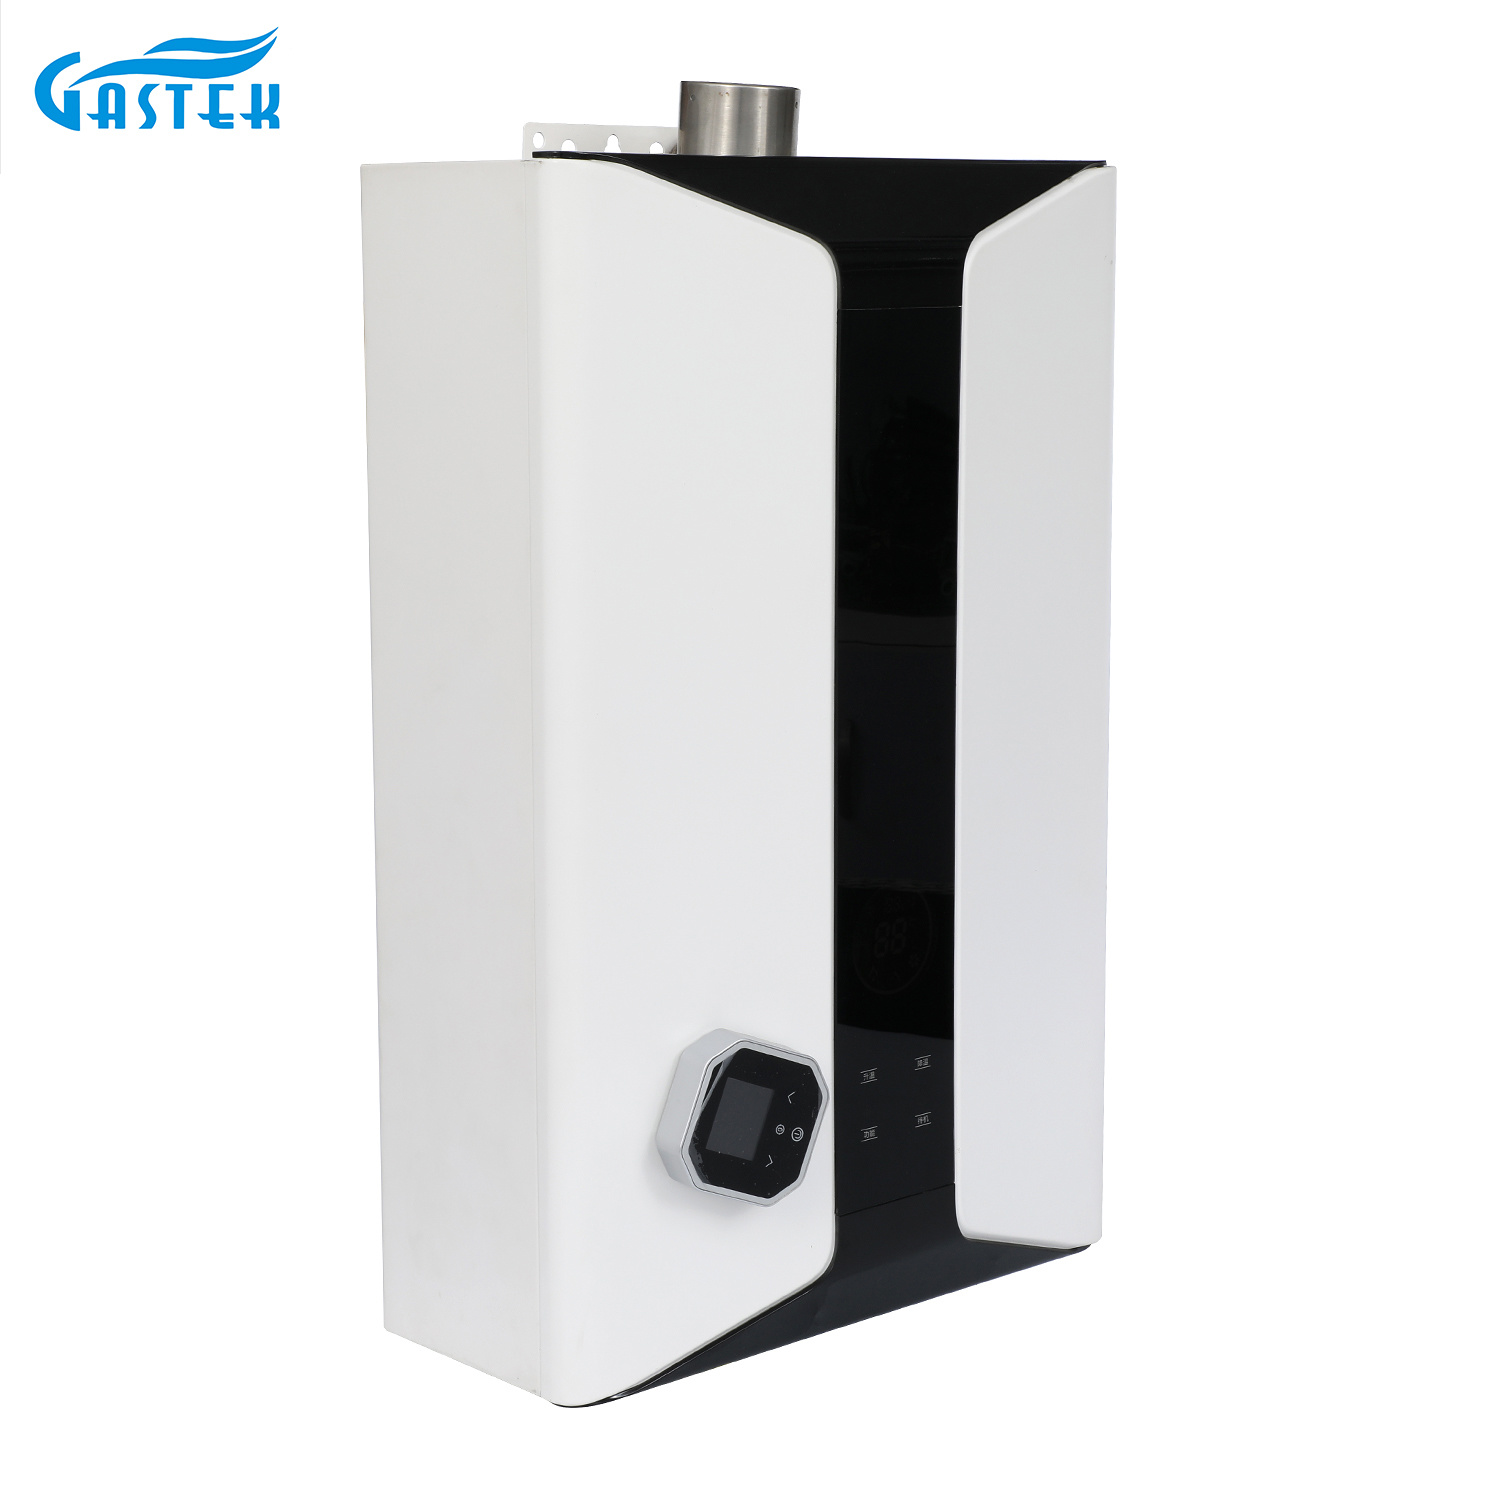 LCD Screen Display Constant Temperature Balanced Type Tankless Gas Water Heater for Bathing